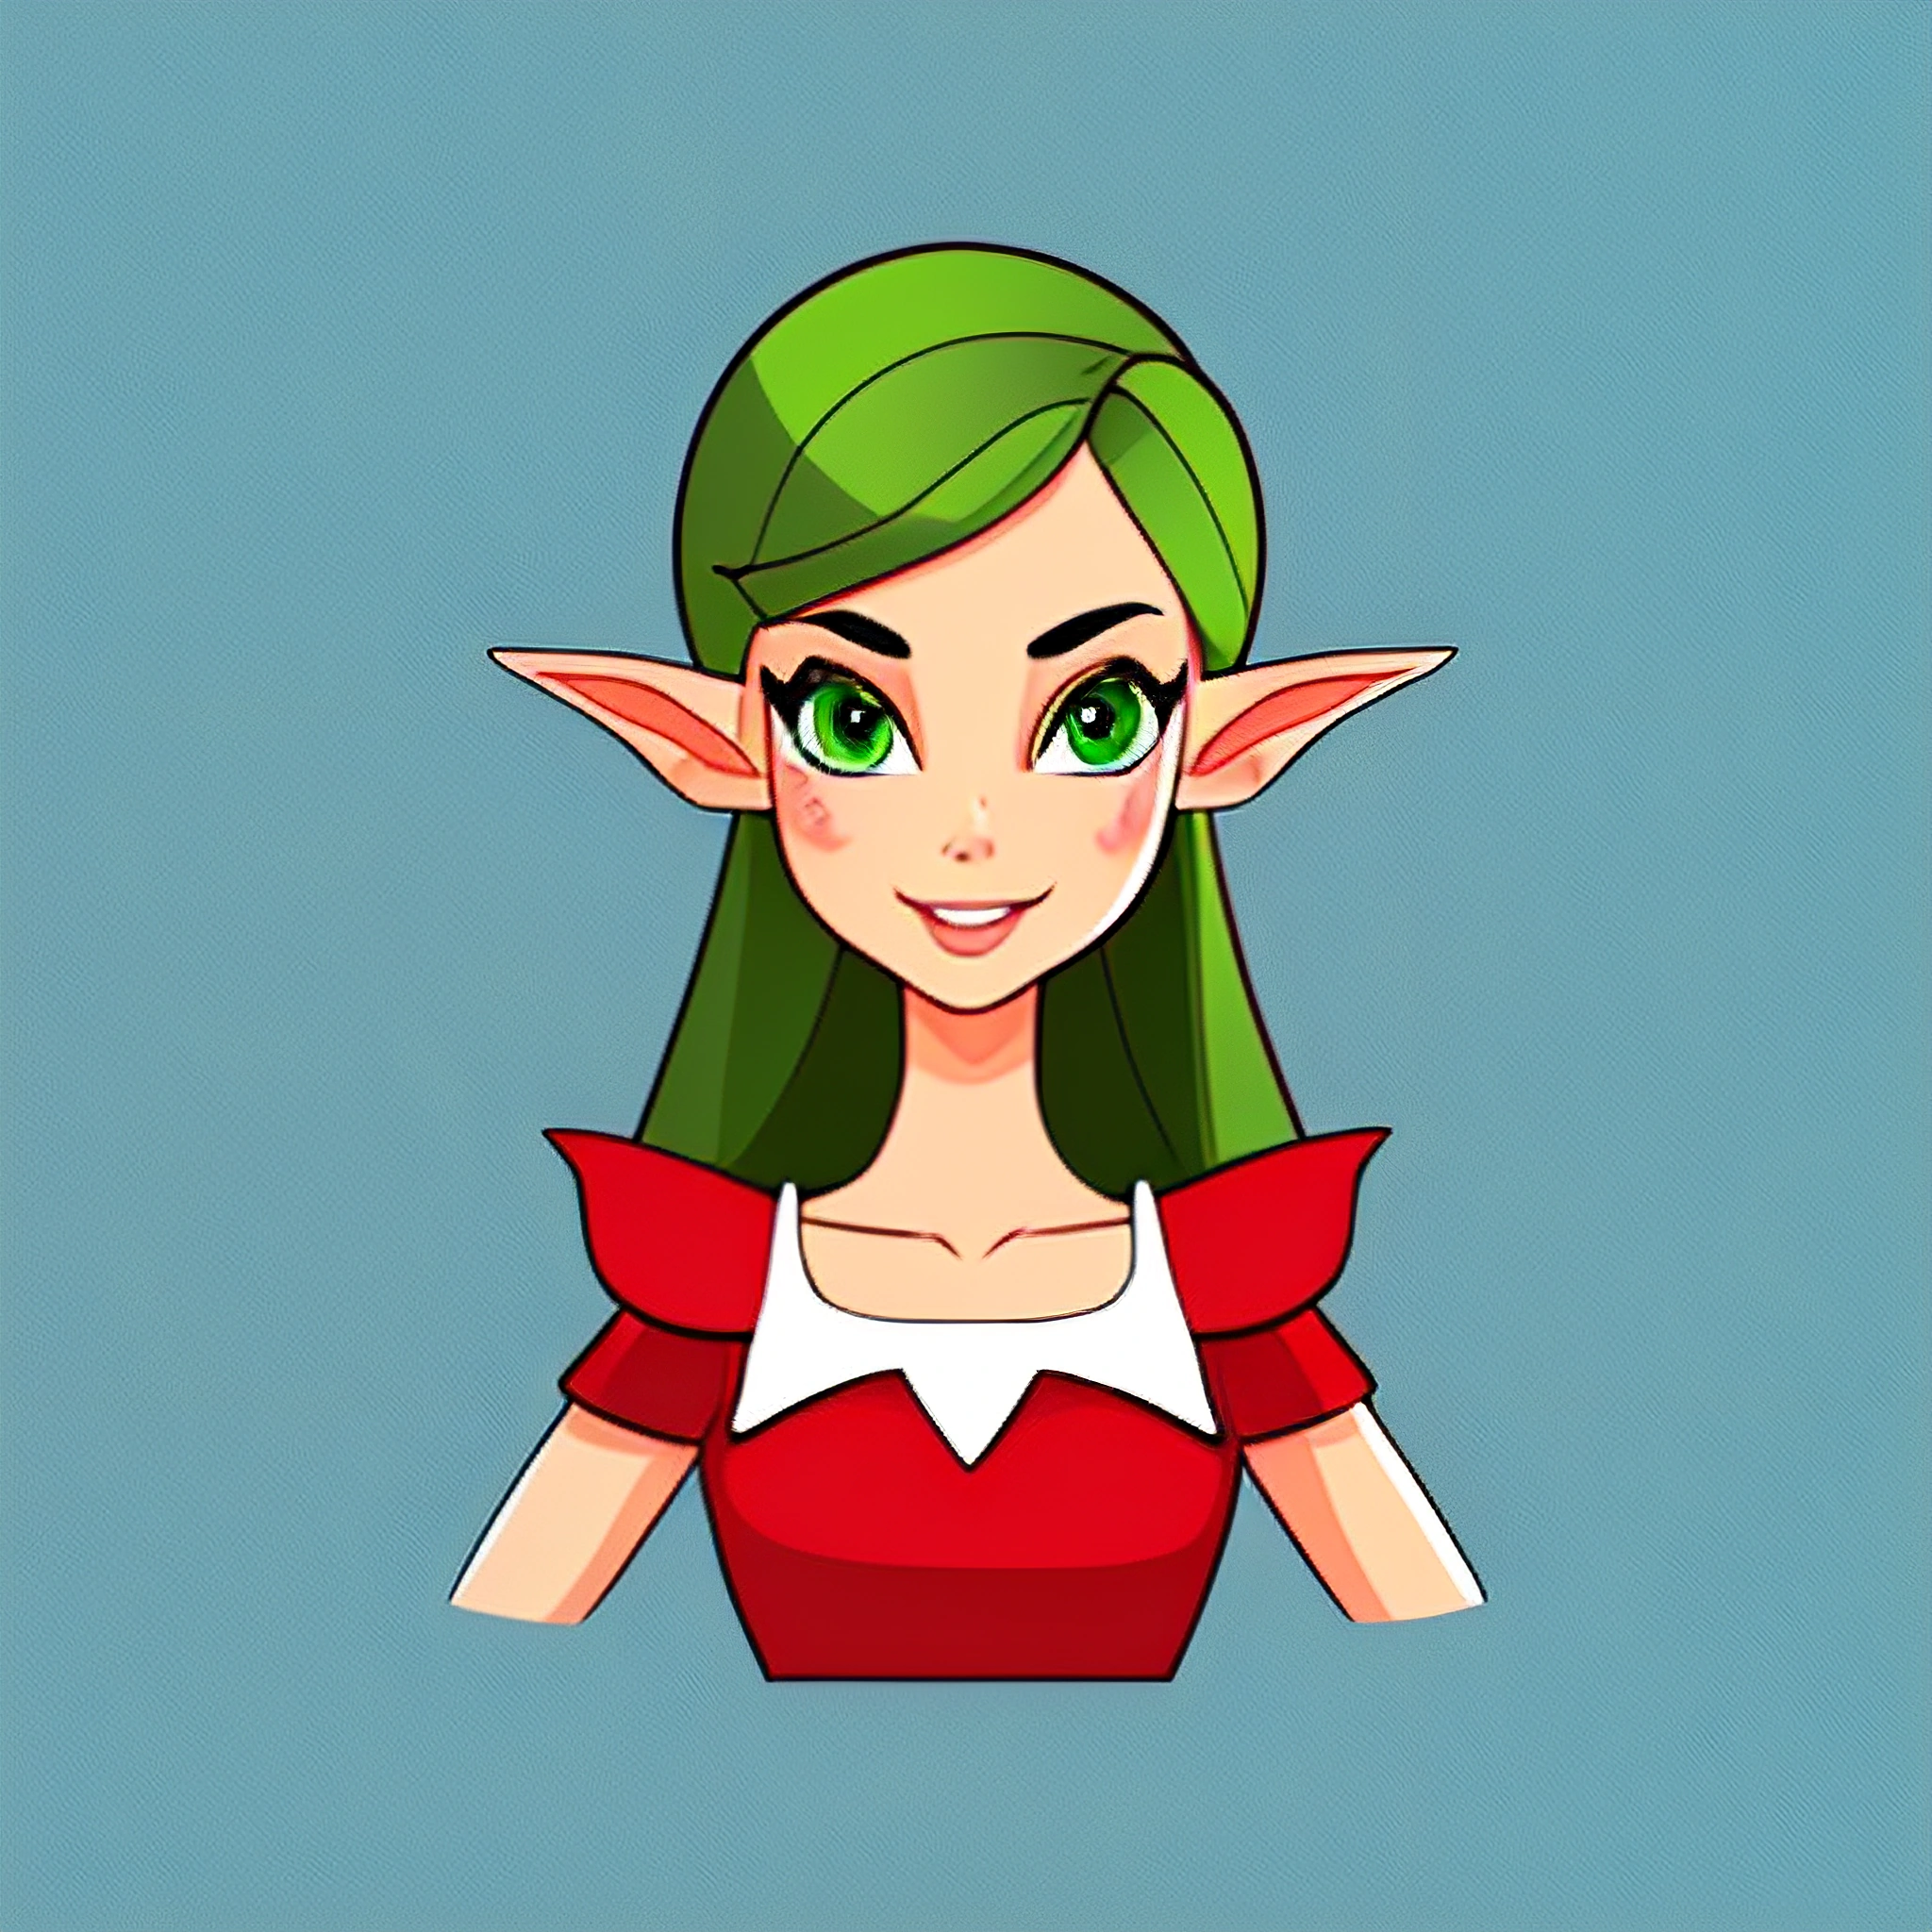 cartoon girl with green hair and green eyes in a red dress